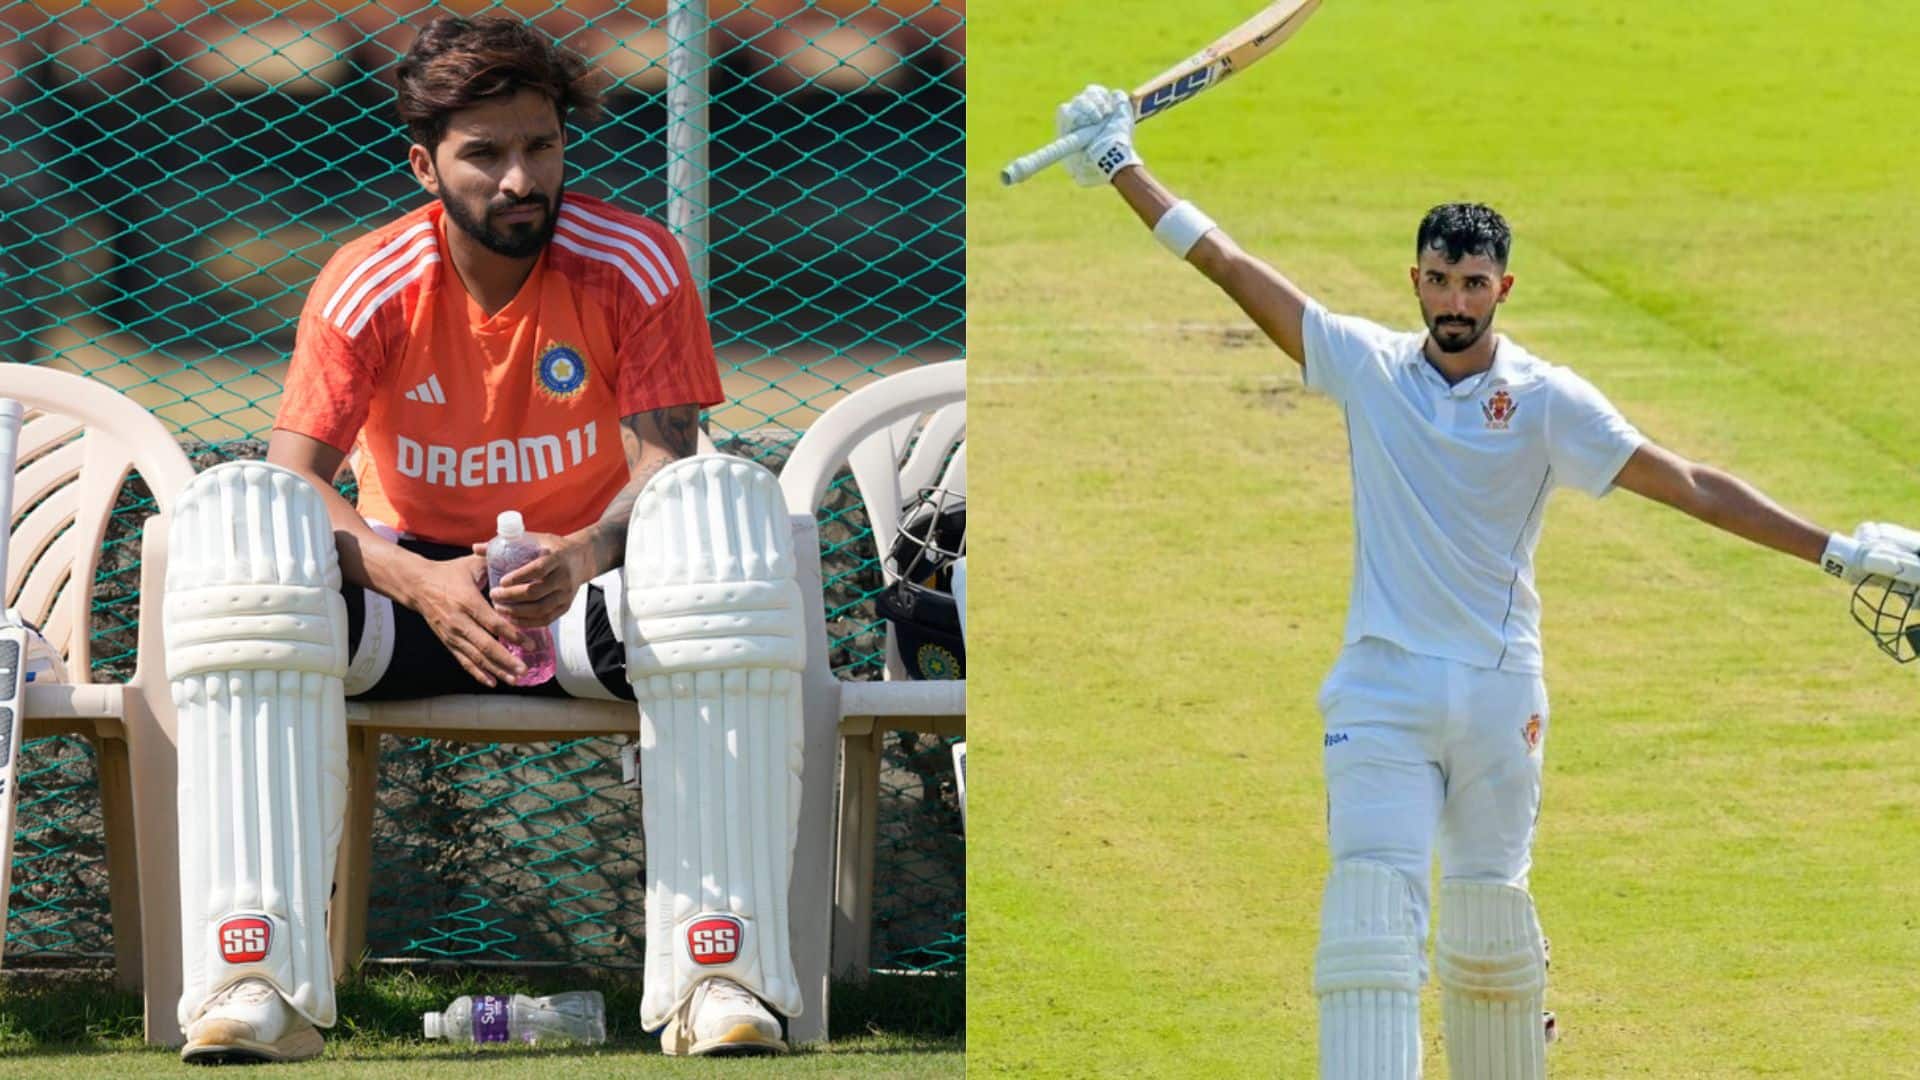 Patidar Out, Bumrah & Padikkal In; India's Probable XI For 5th Test vs ENG